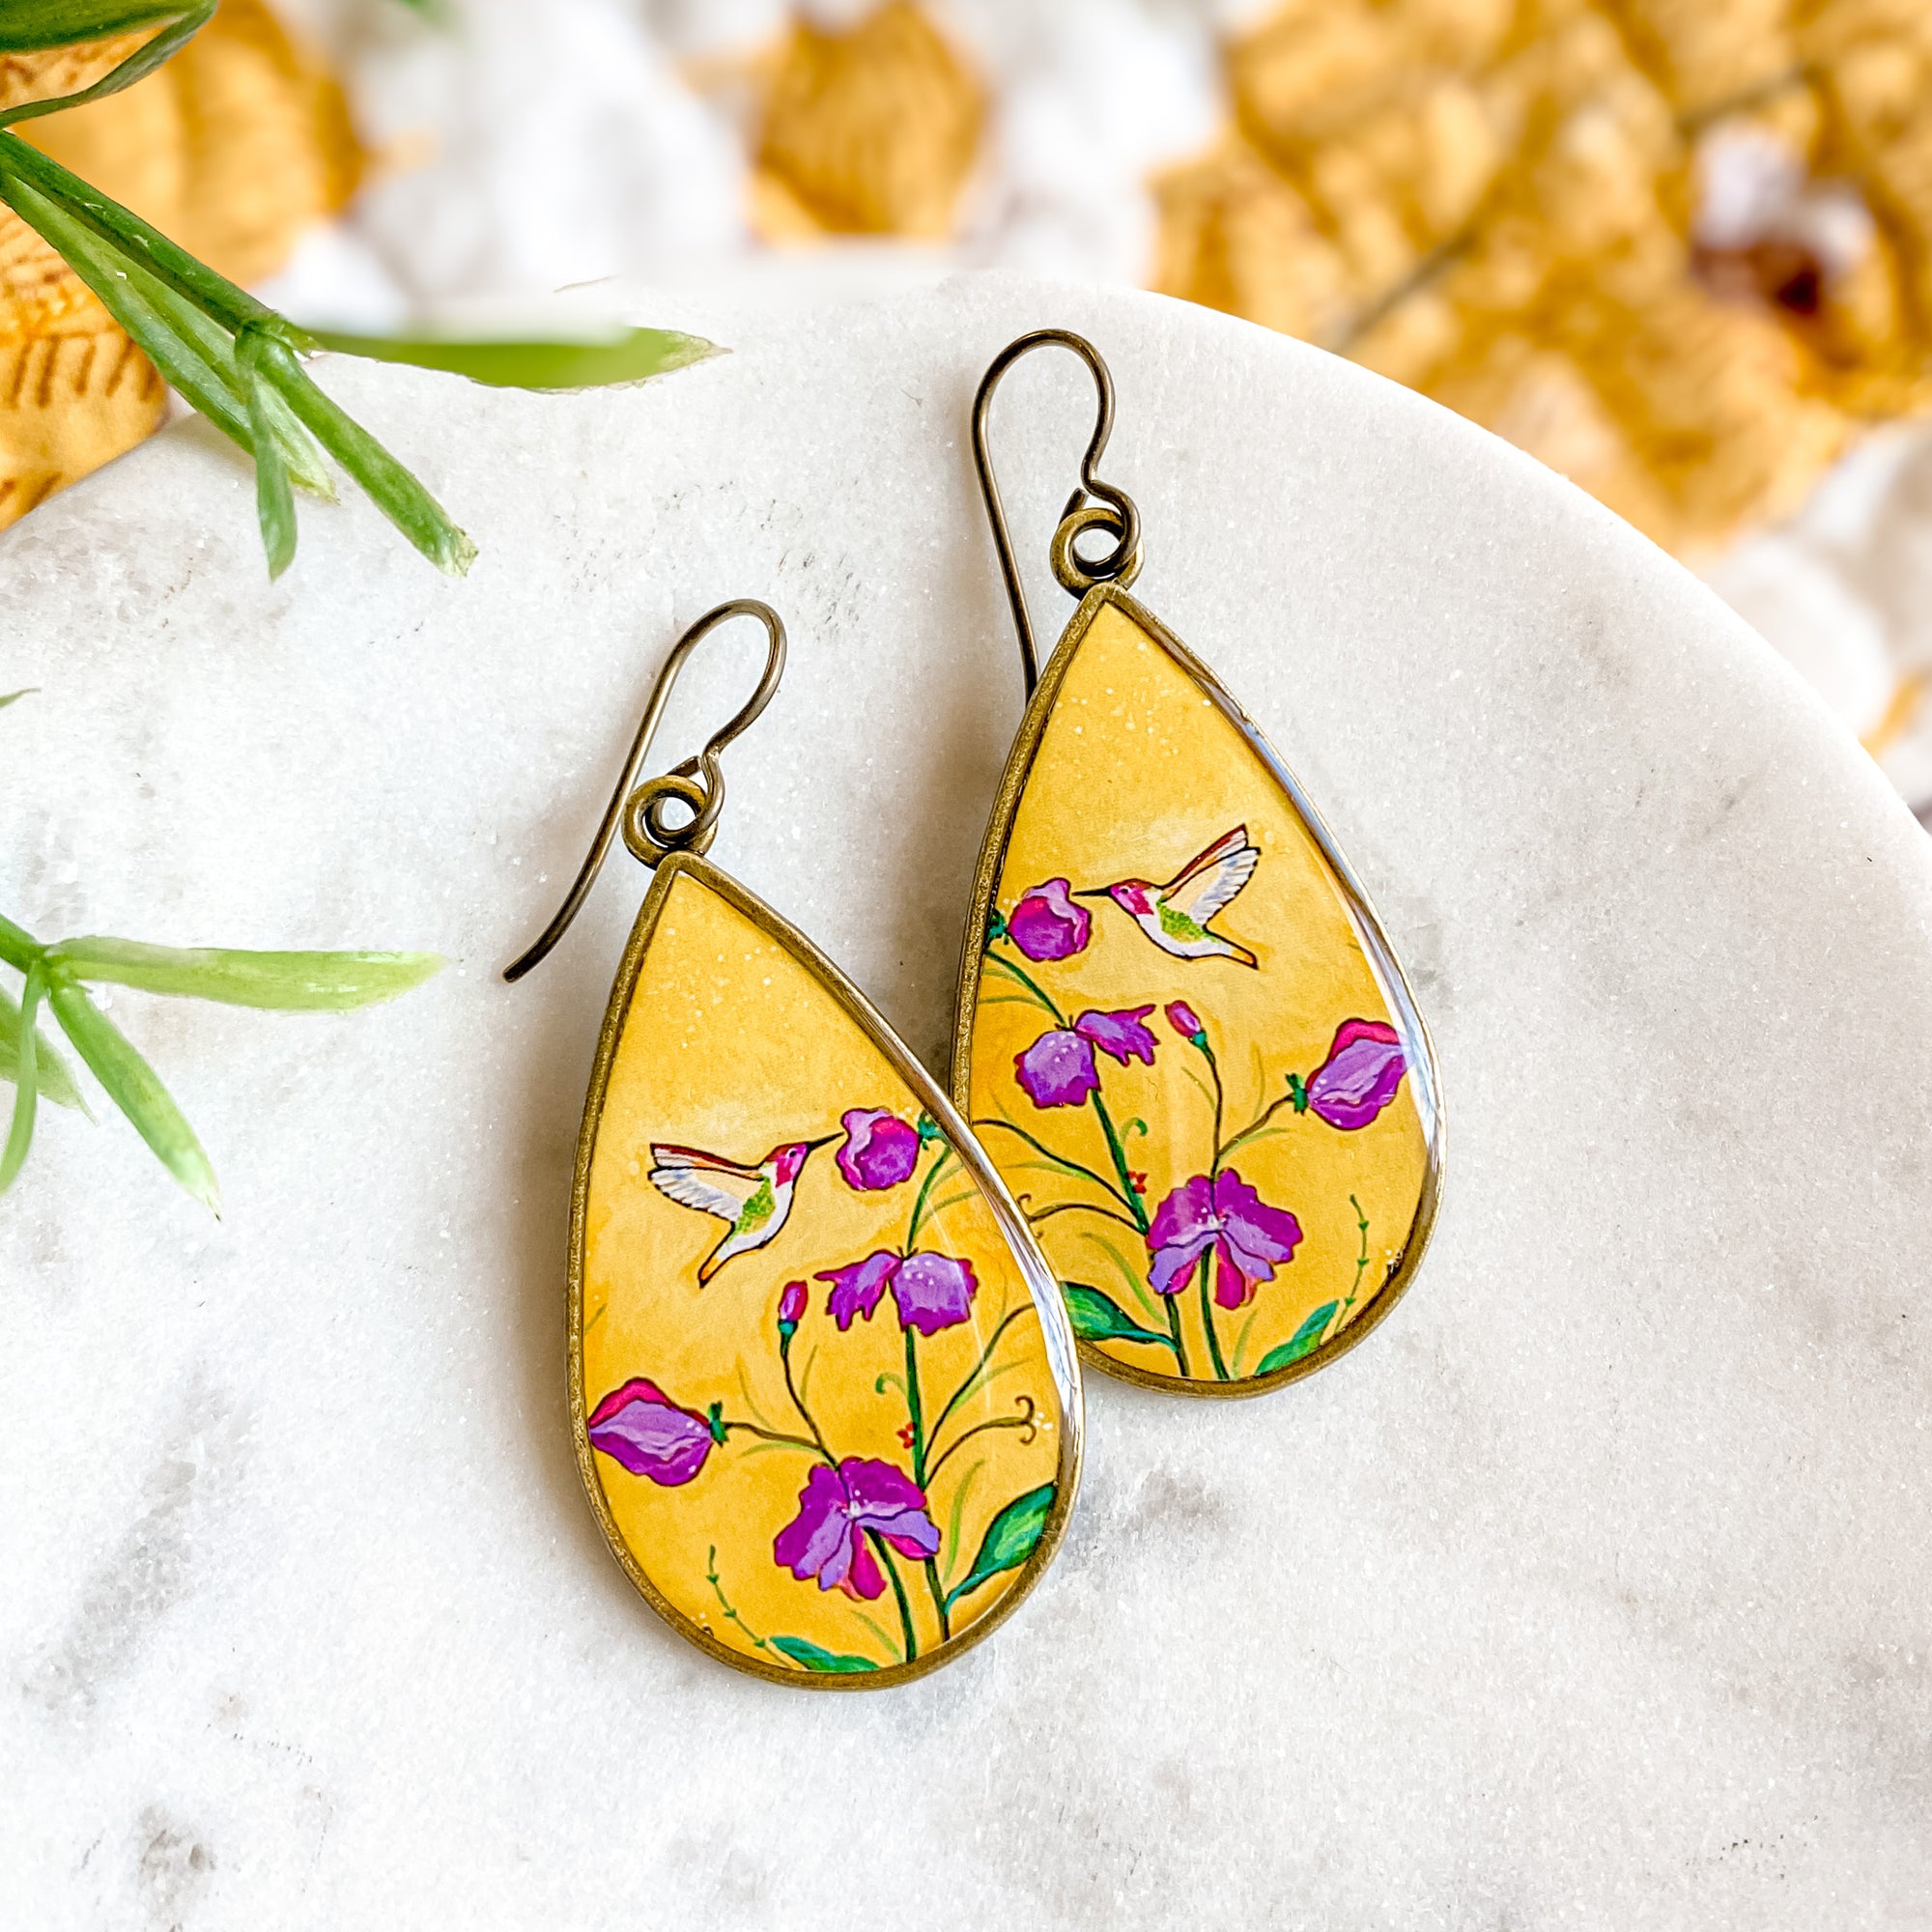 a pair of yellow earrings with purple flowers painted on them